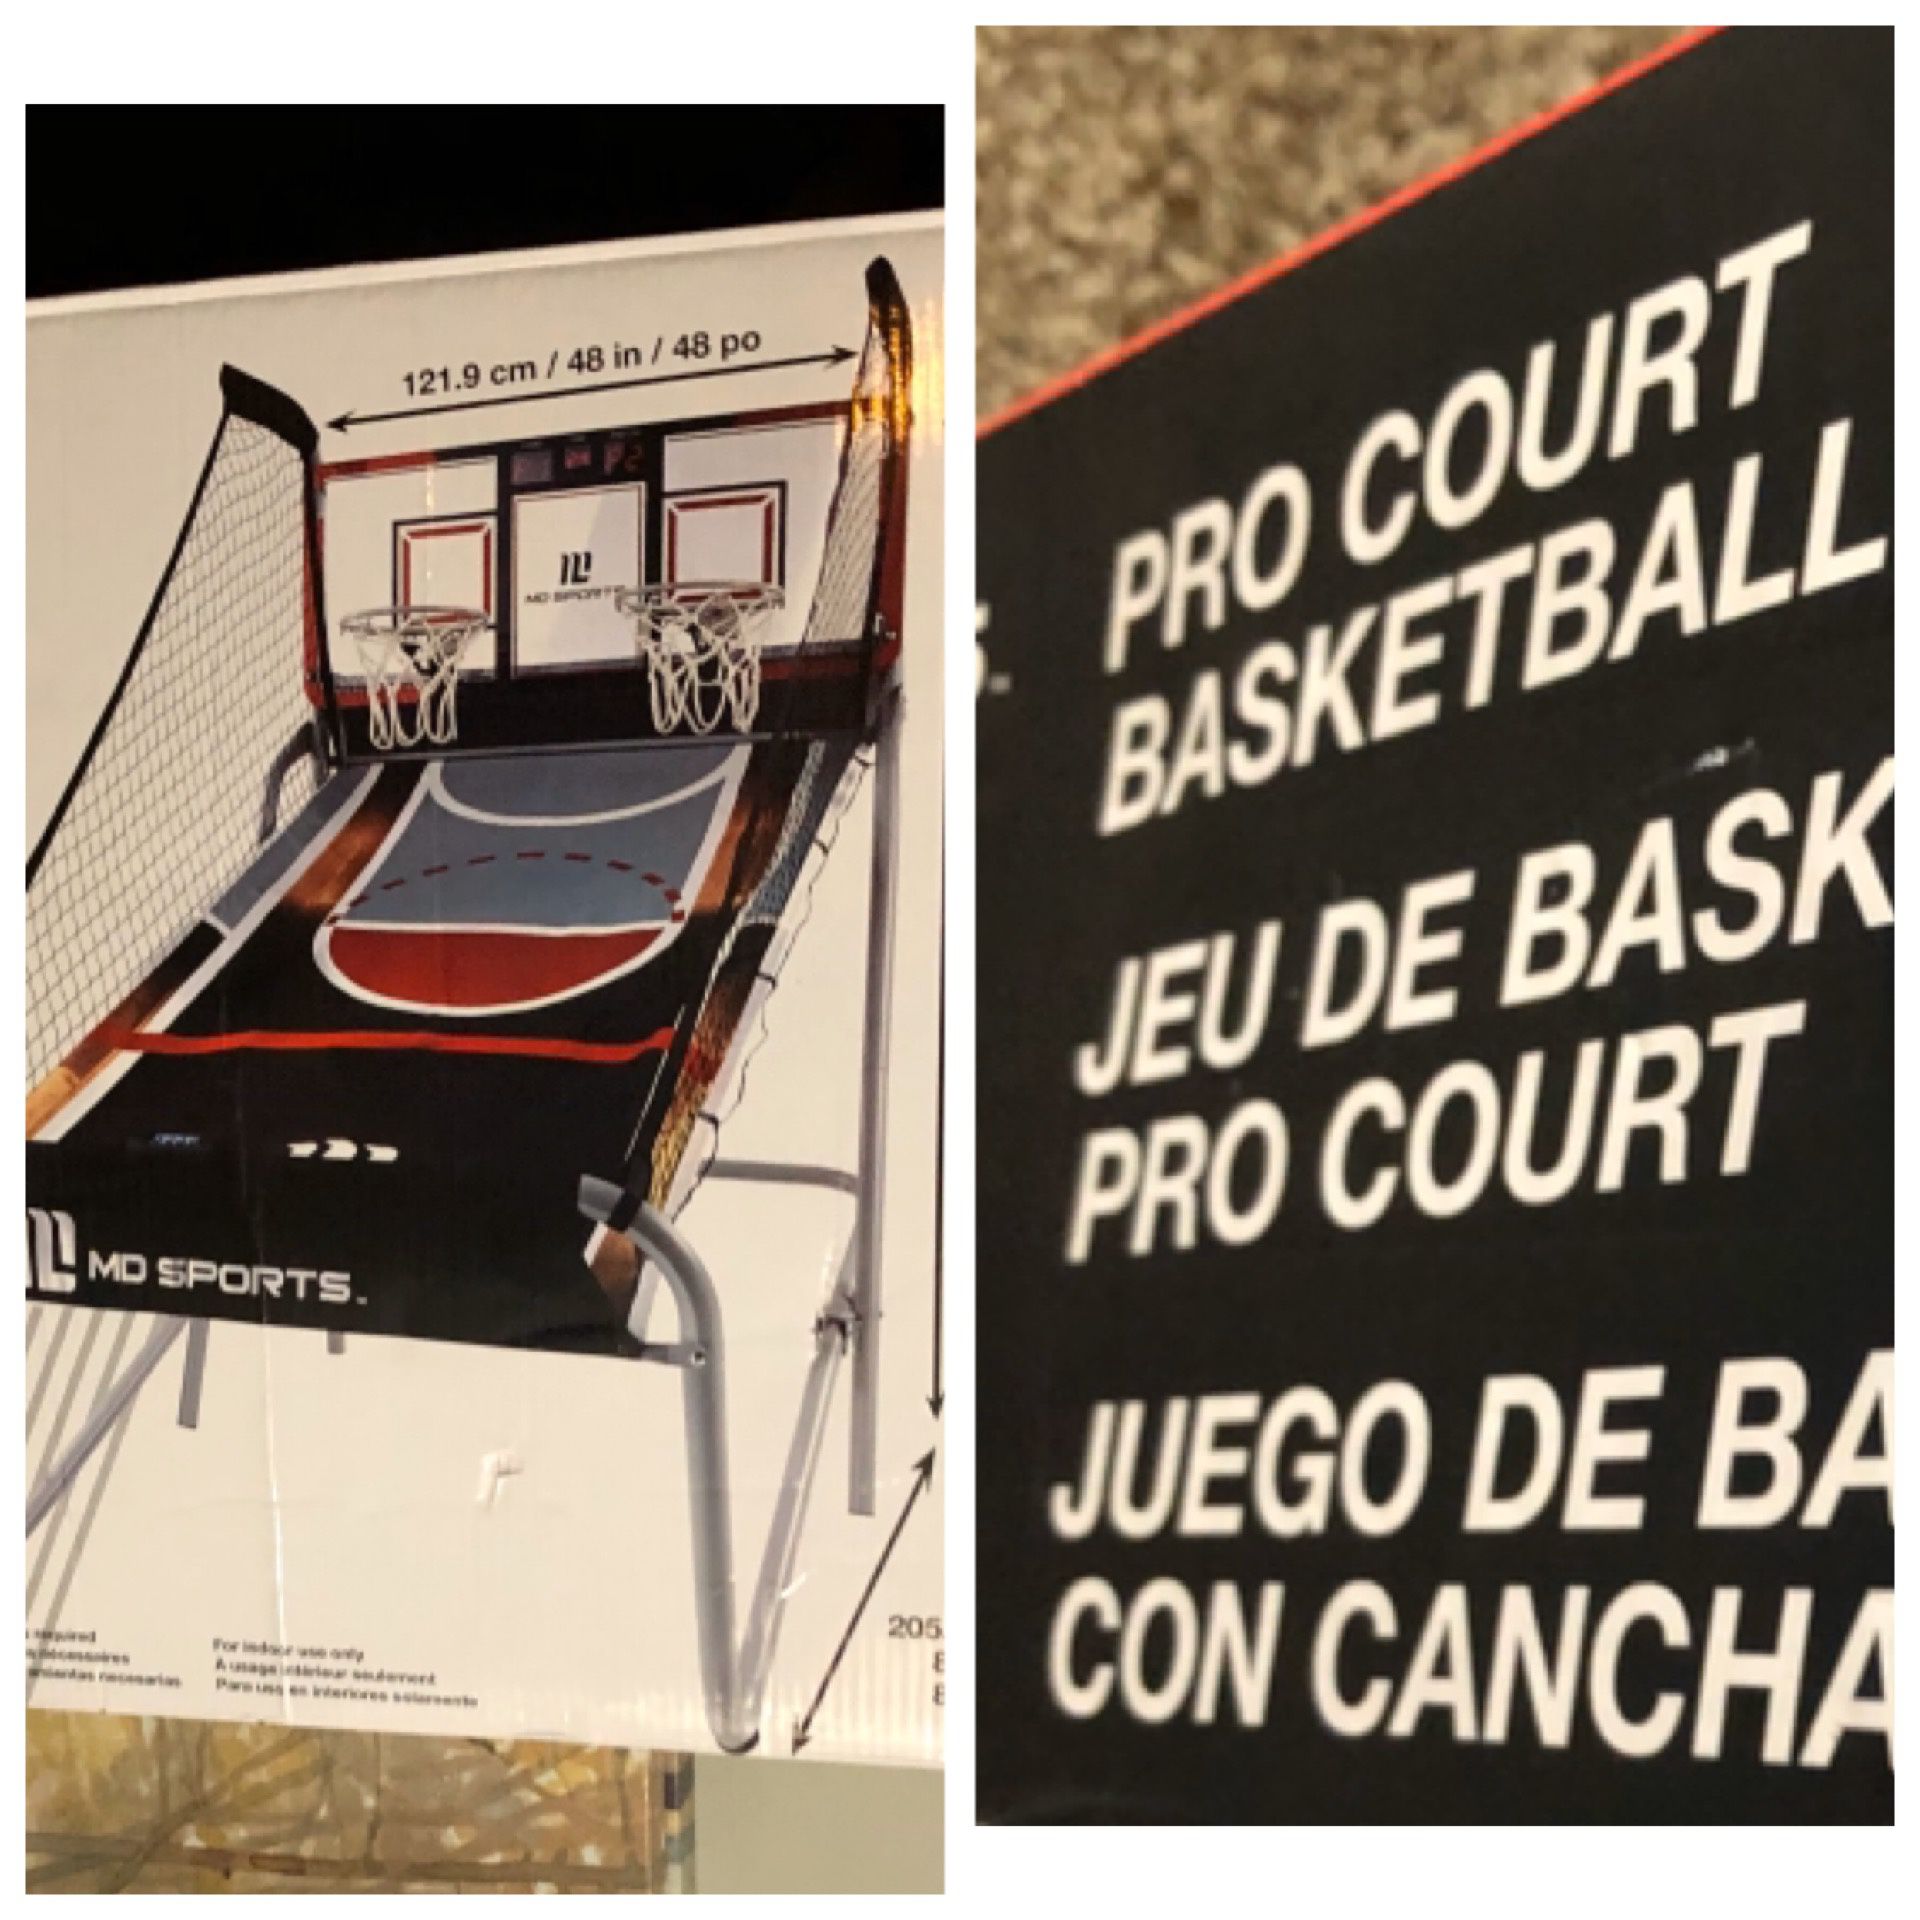 MD sports heavy duty 2 player basketball game 8 diff games.enlarged LED electronic scorer & game clock. Model BG 144Y19004.foldable design. BRAND NEW